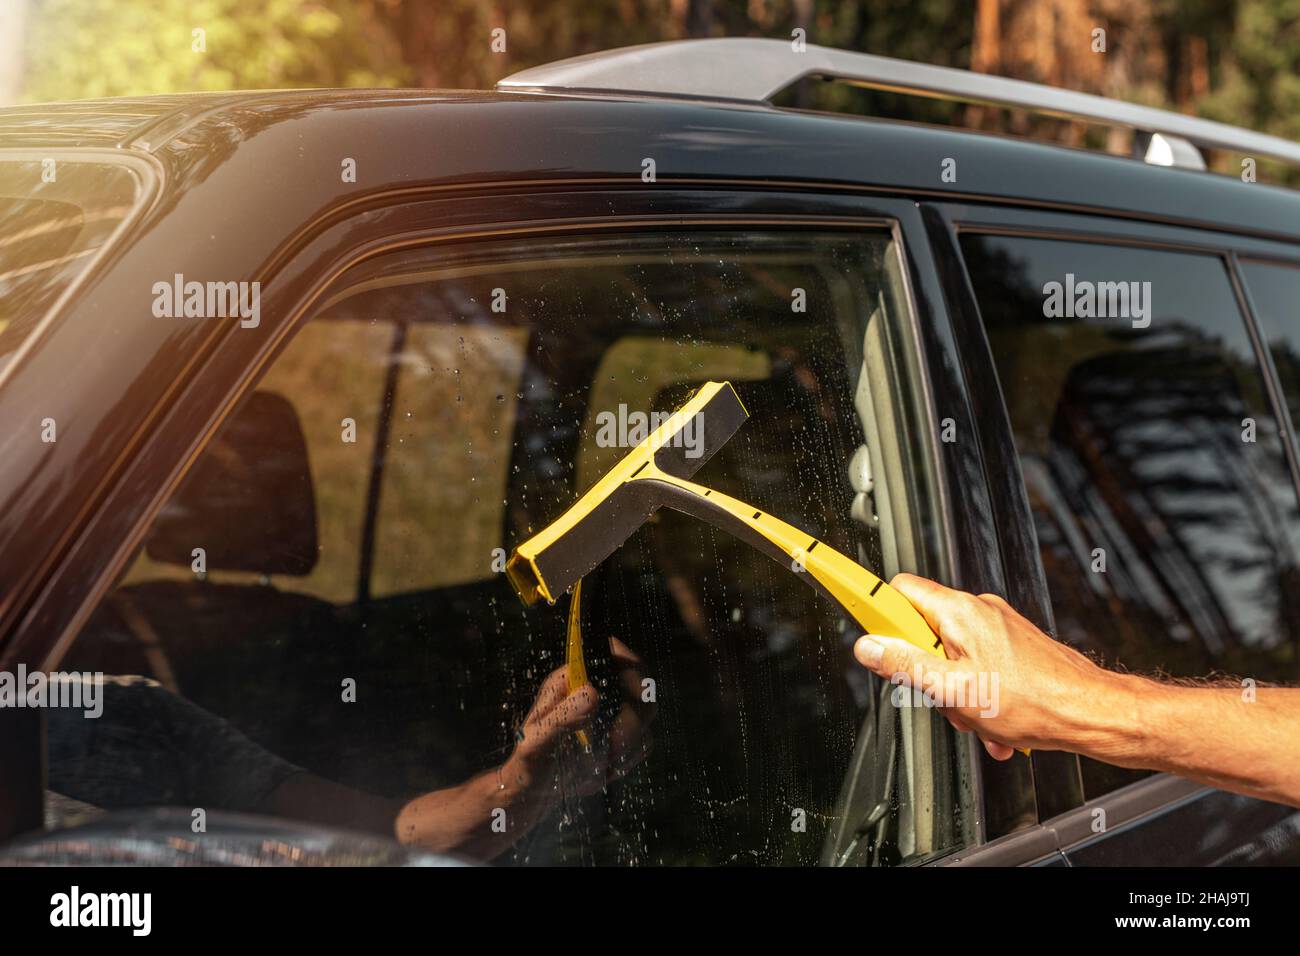 Hand with car rubber scraber clean auto window outside. Stock Photo